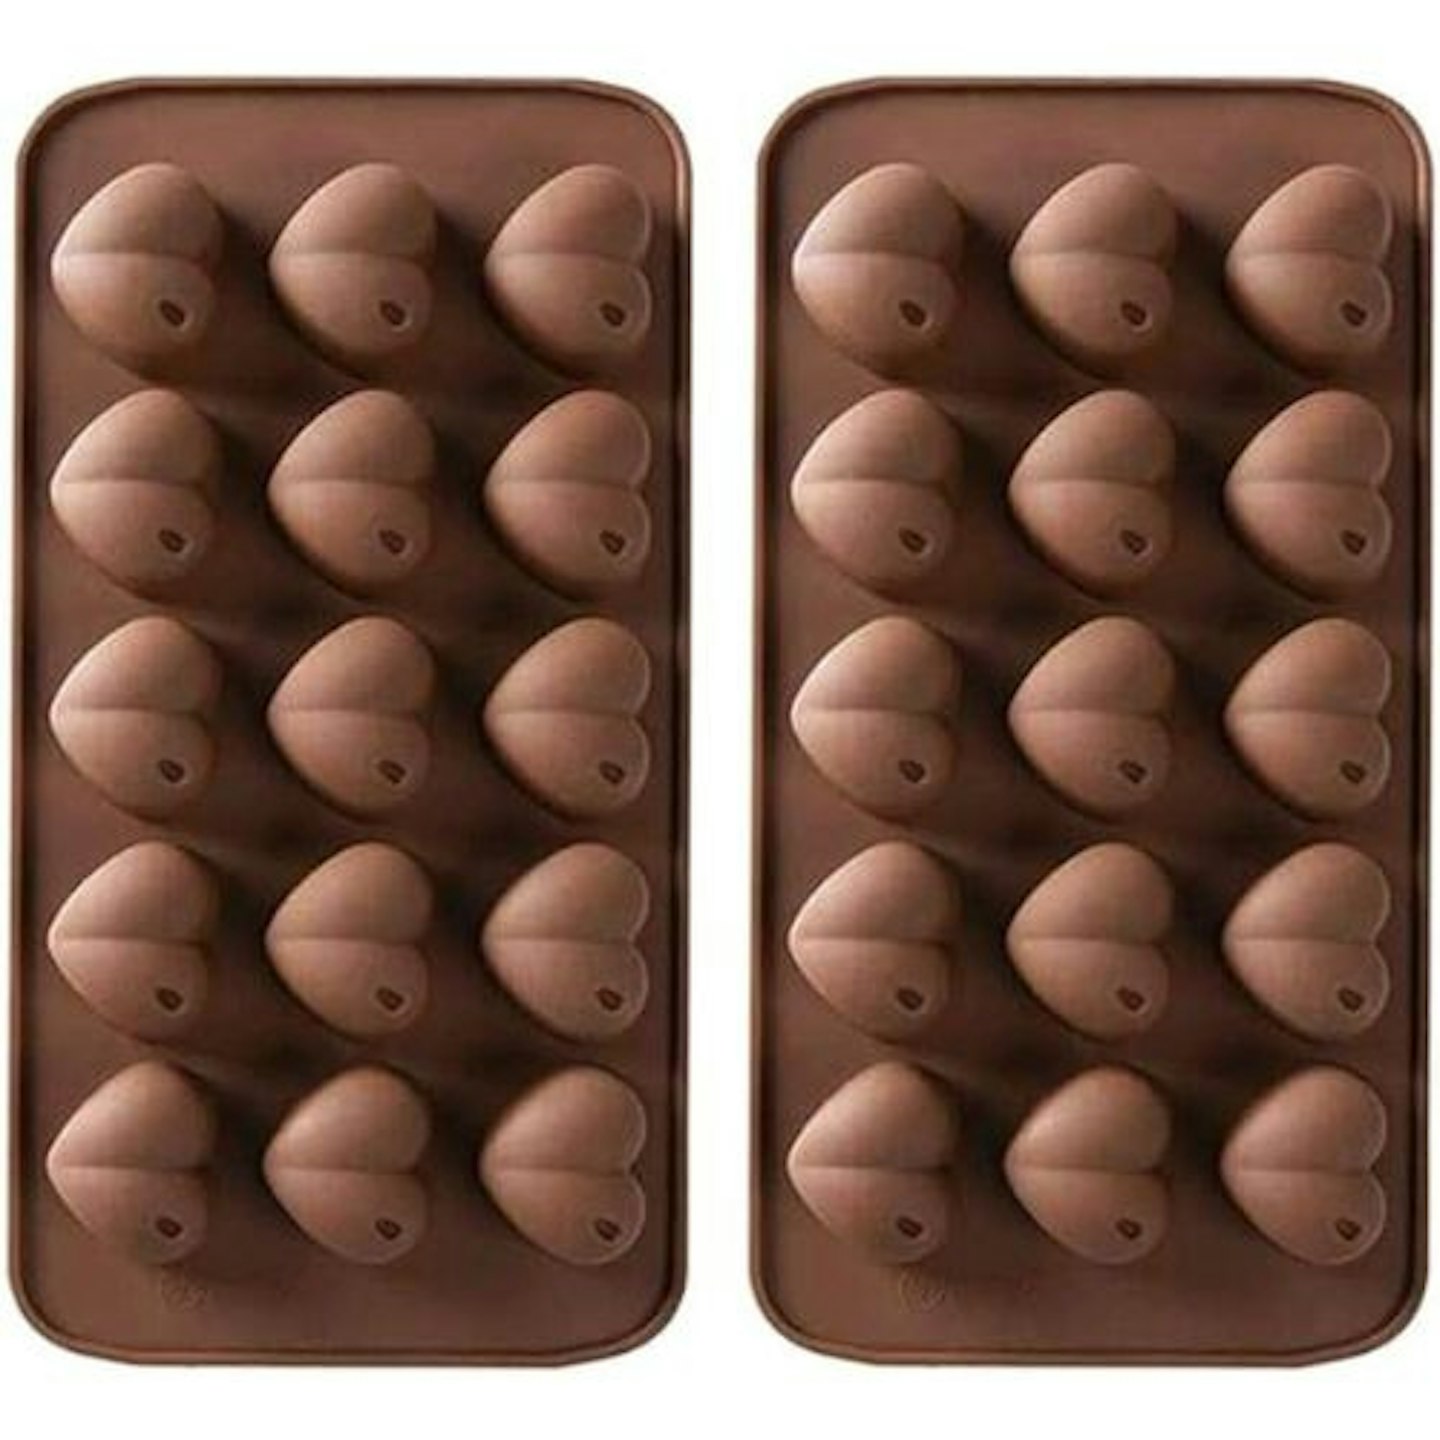 Heart Shape Silicone Chocolate Moulds, 2 Pieces